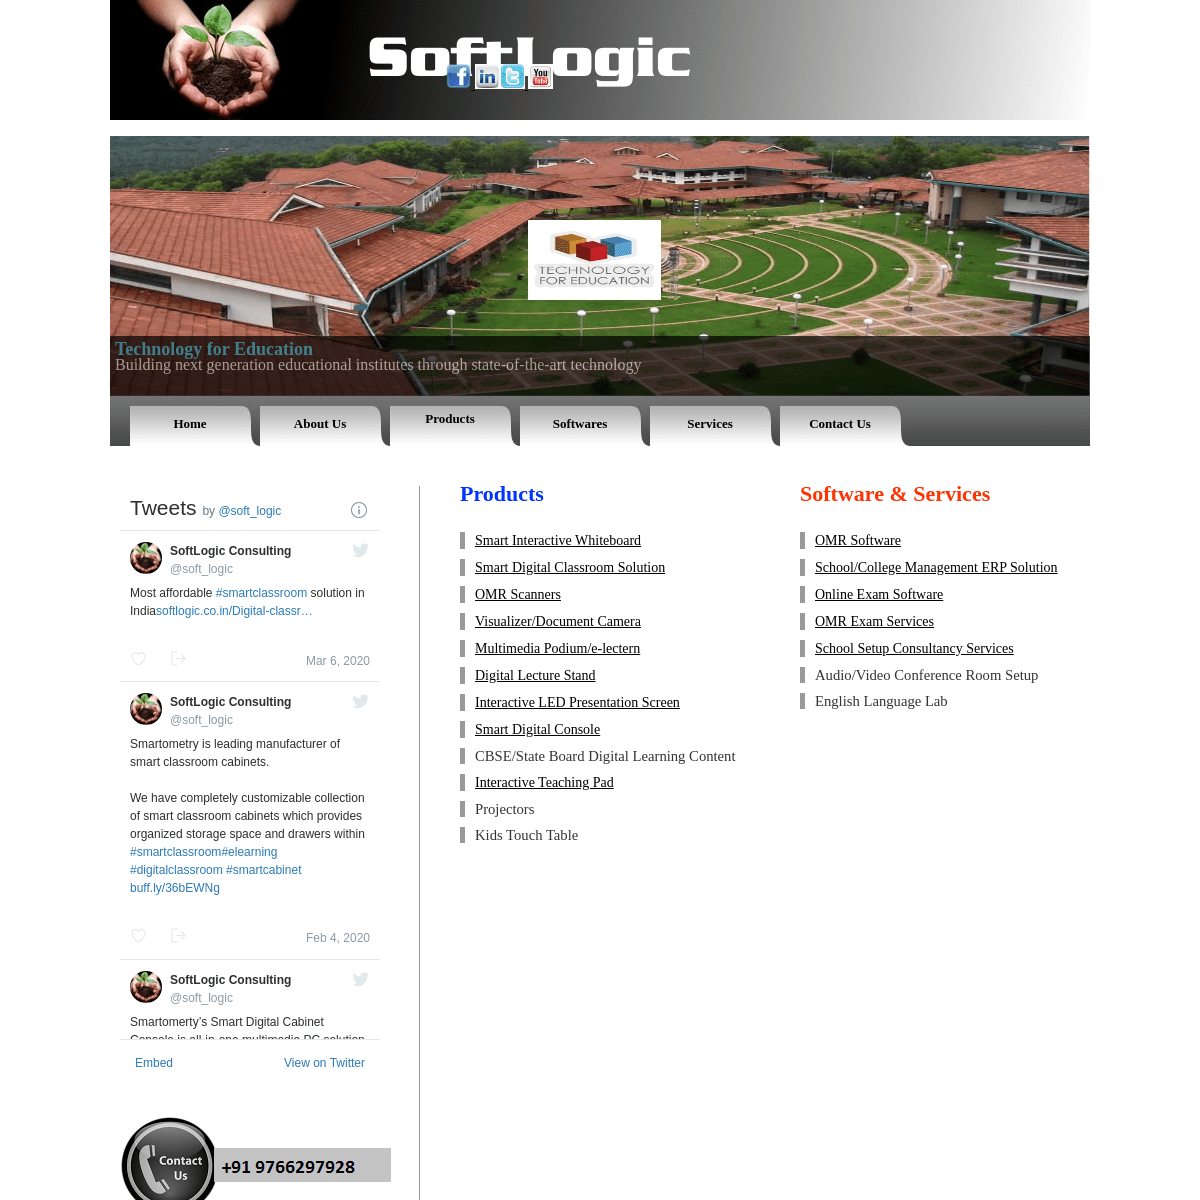 A complete backup of softlogic.co.in